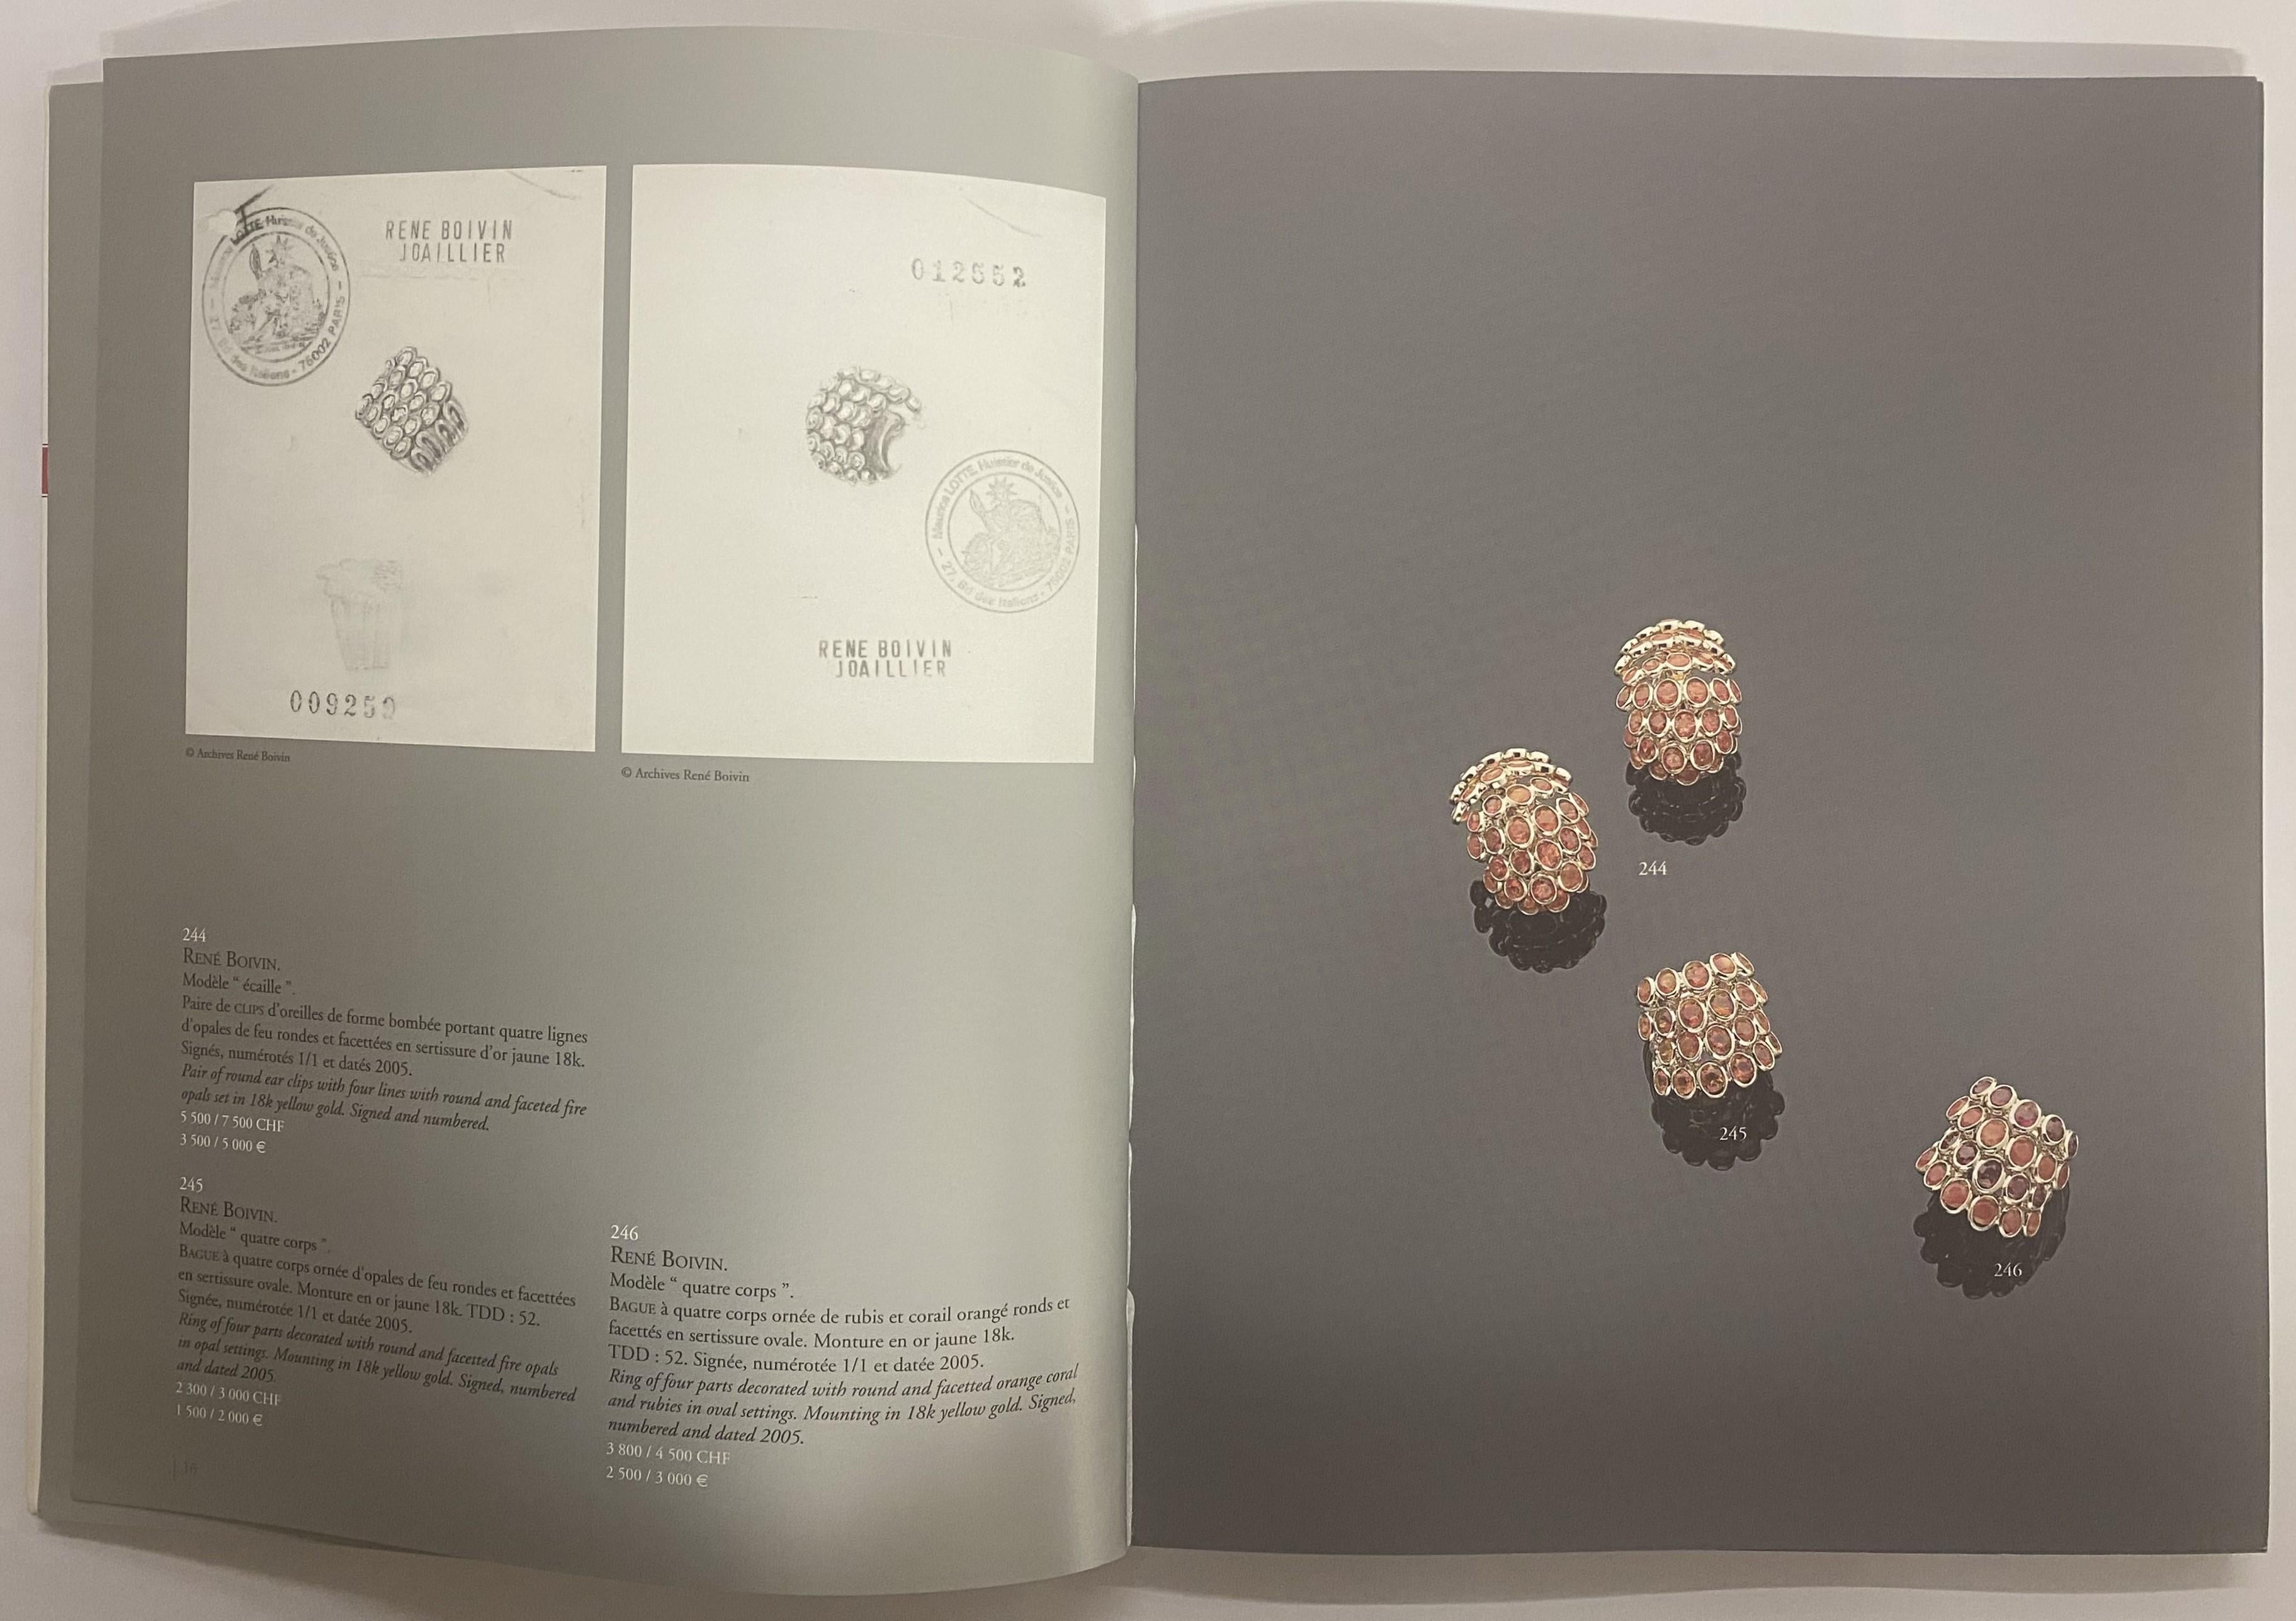 Dating from May 2005, this is a sale catalogue produced by Pierre Berge & Associates. For a unique sale of Rene Boivin jewels - the catalogue in its forward states as follows 